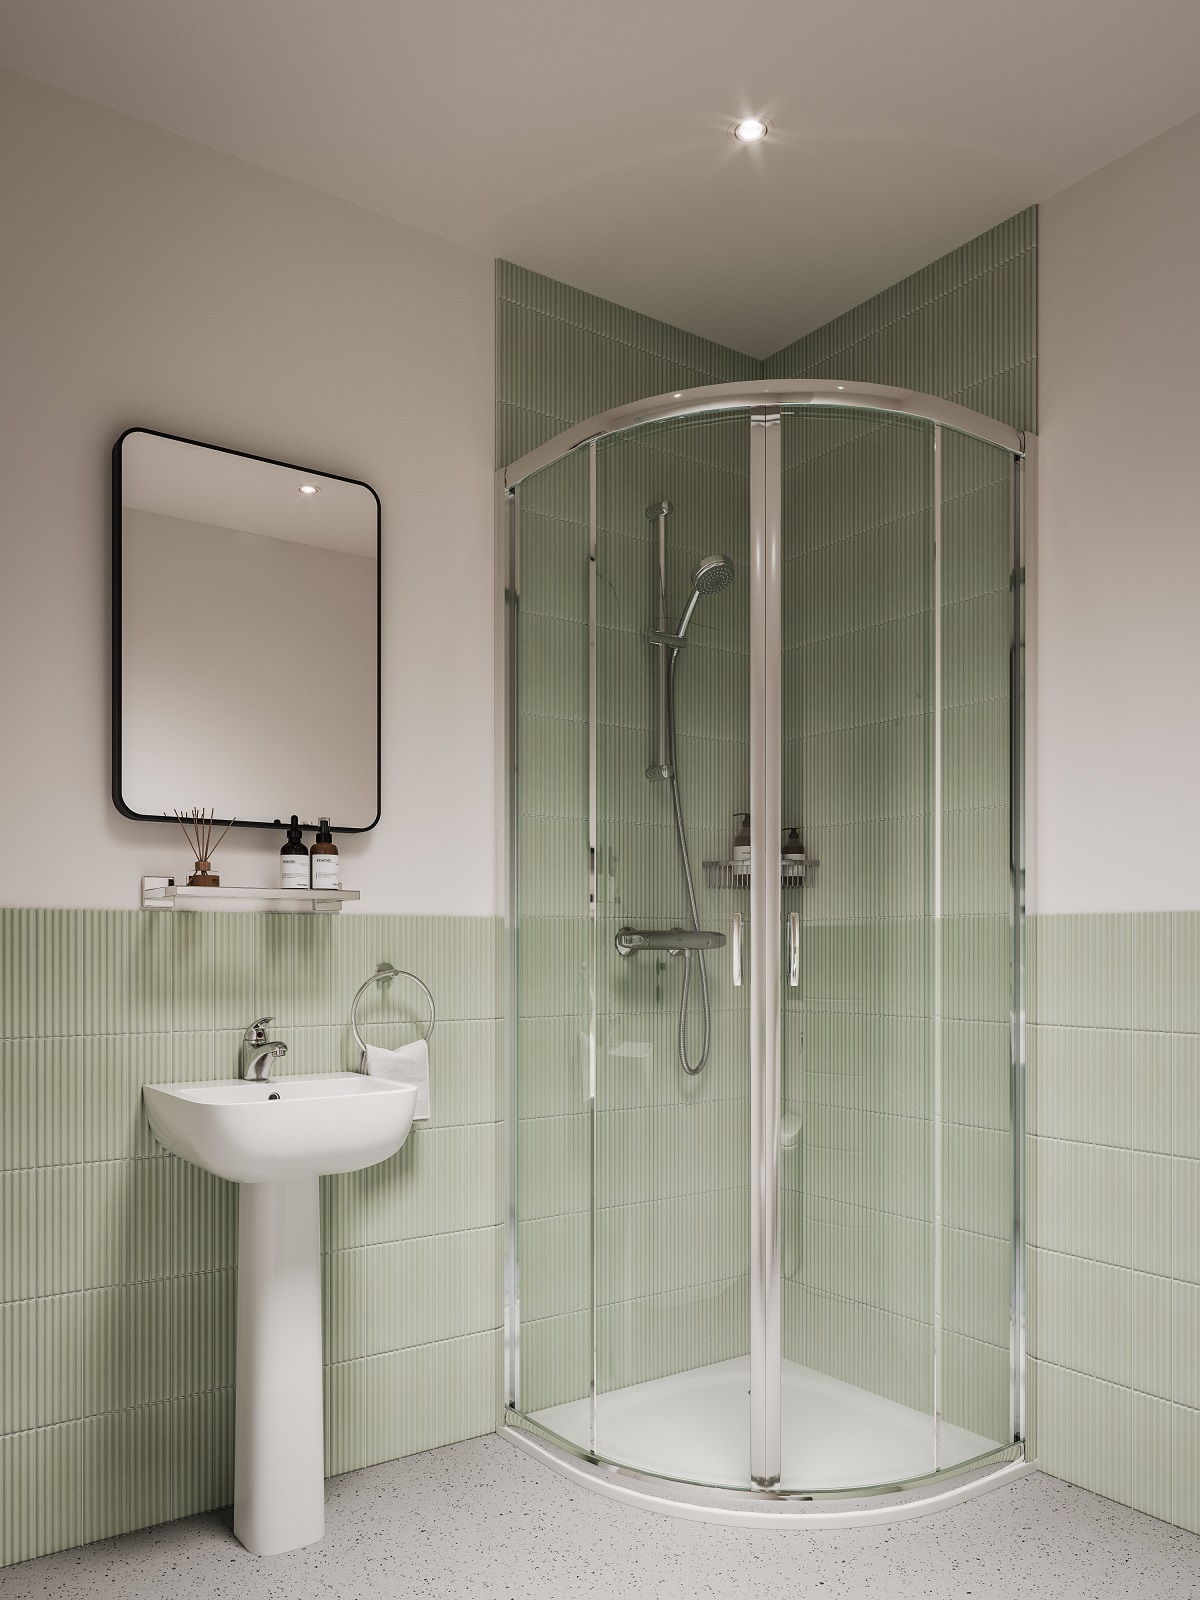 shower and basin in aparthotel bathroom with green tiles